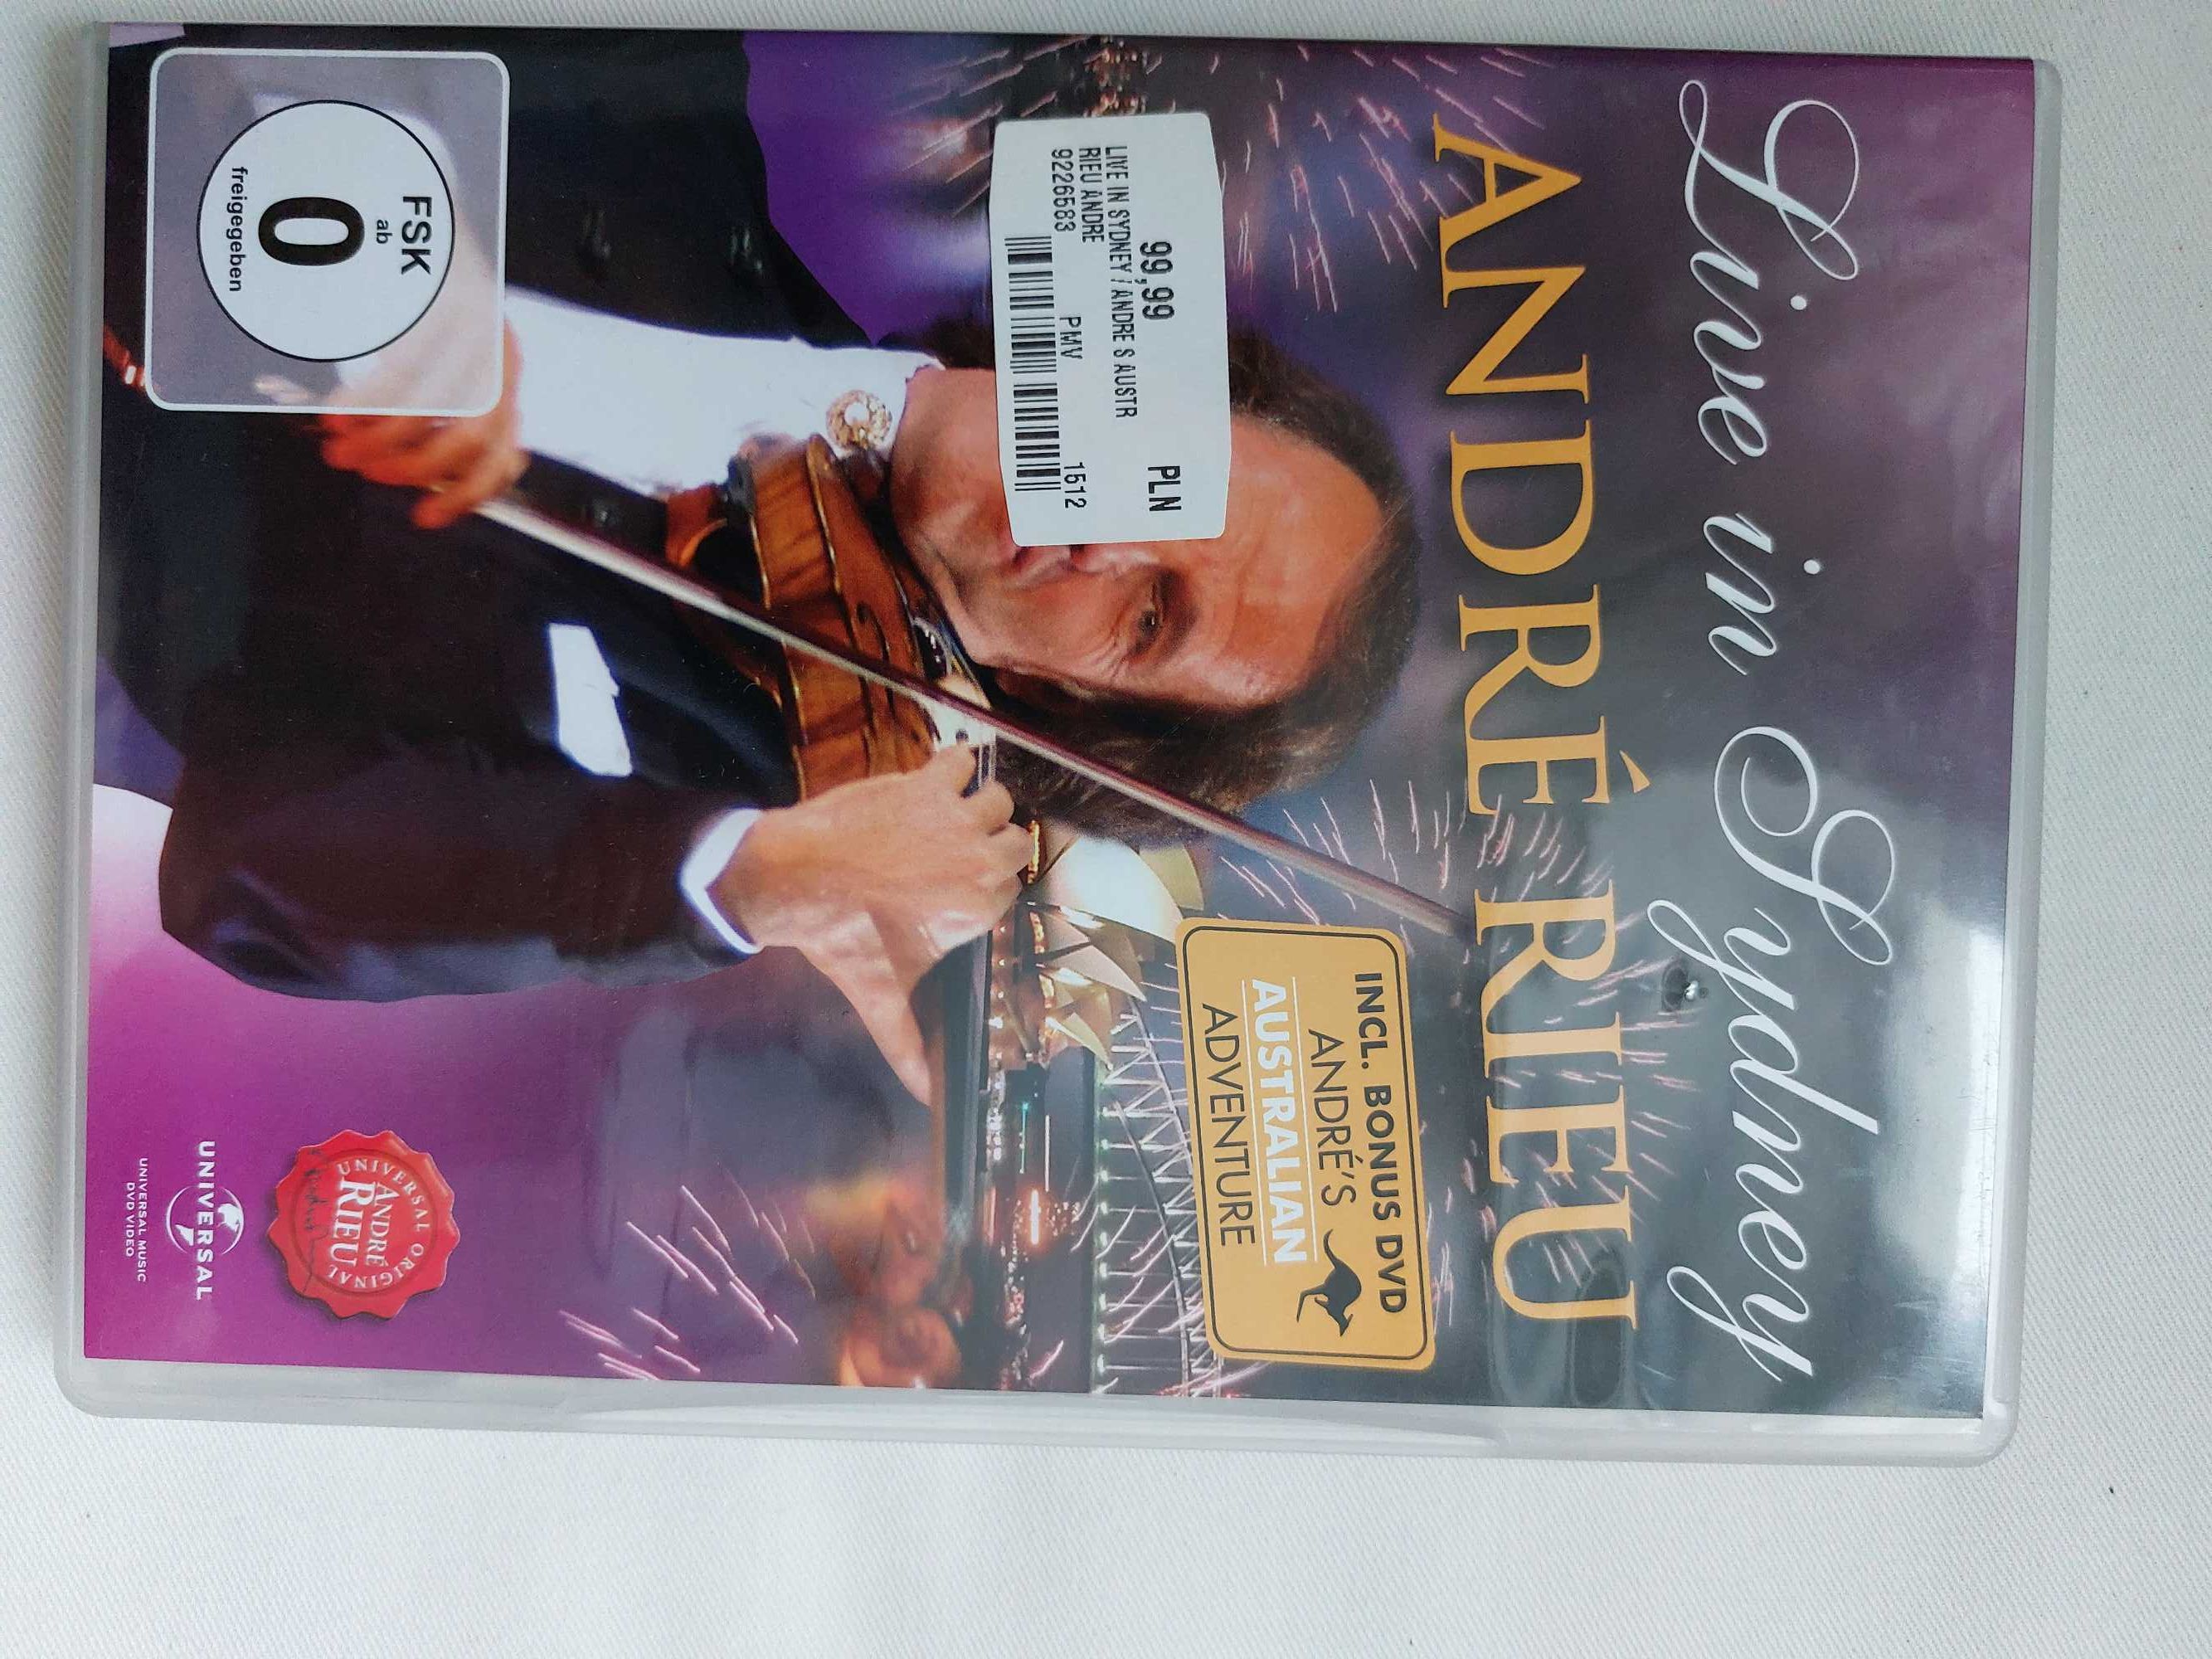 Andre Rieu Live In Sydney DVD